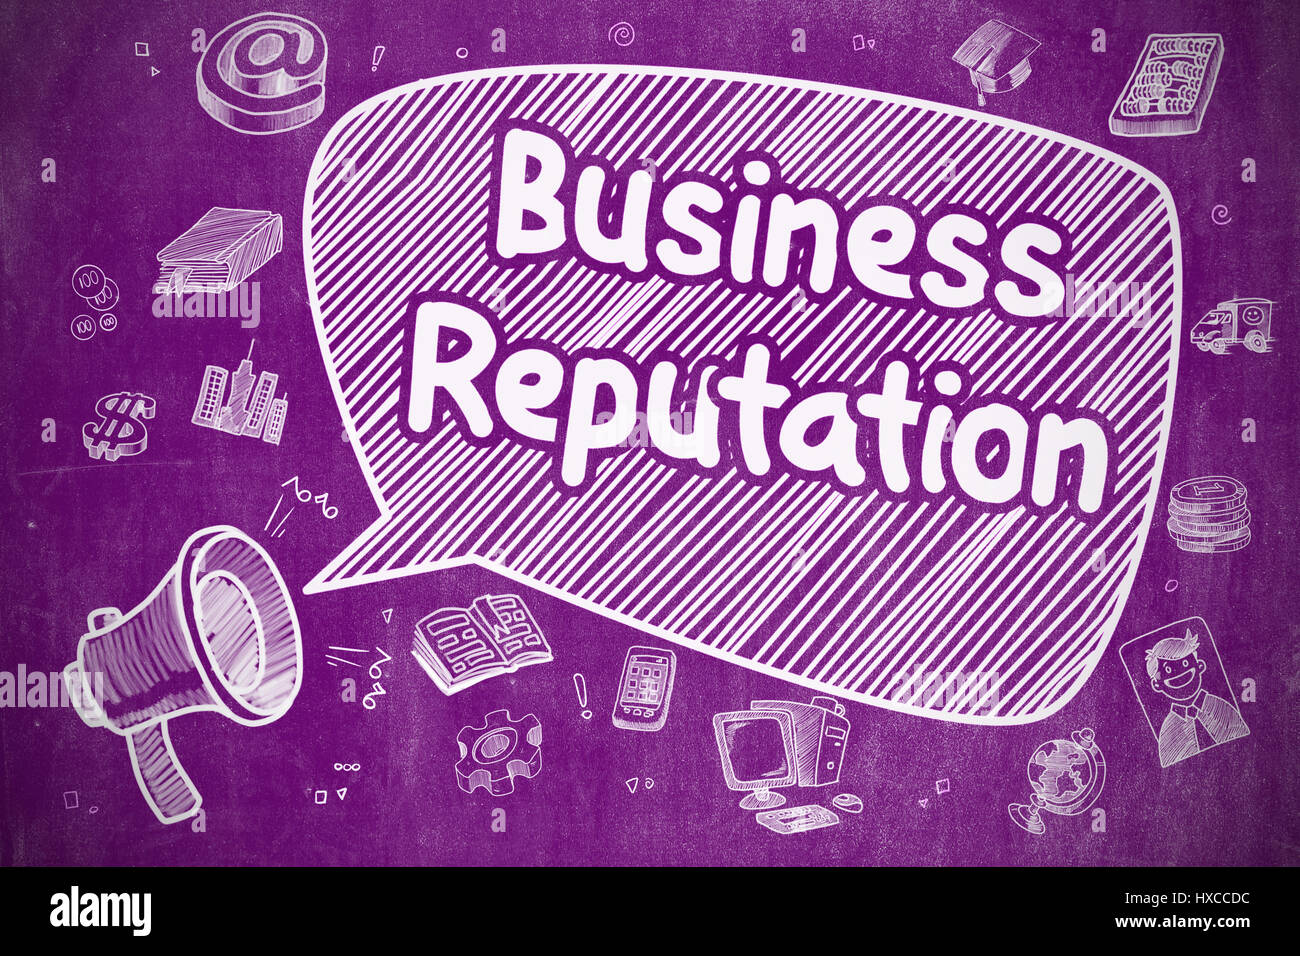 Business Reputation - Business Concept. Stock Photo